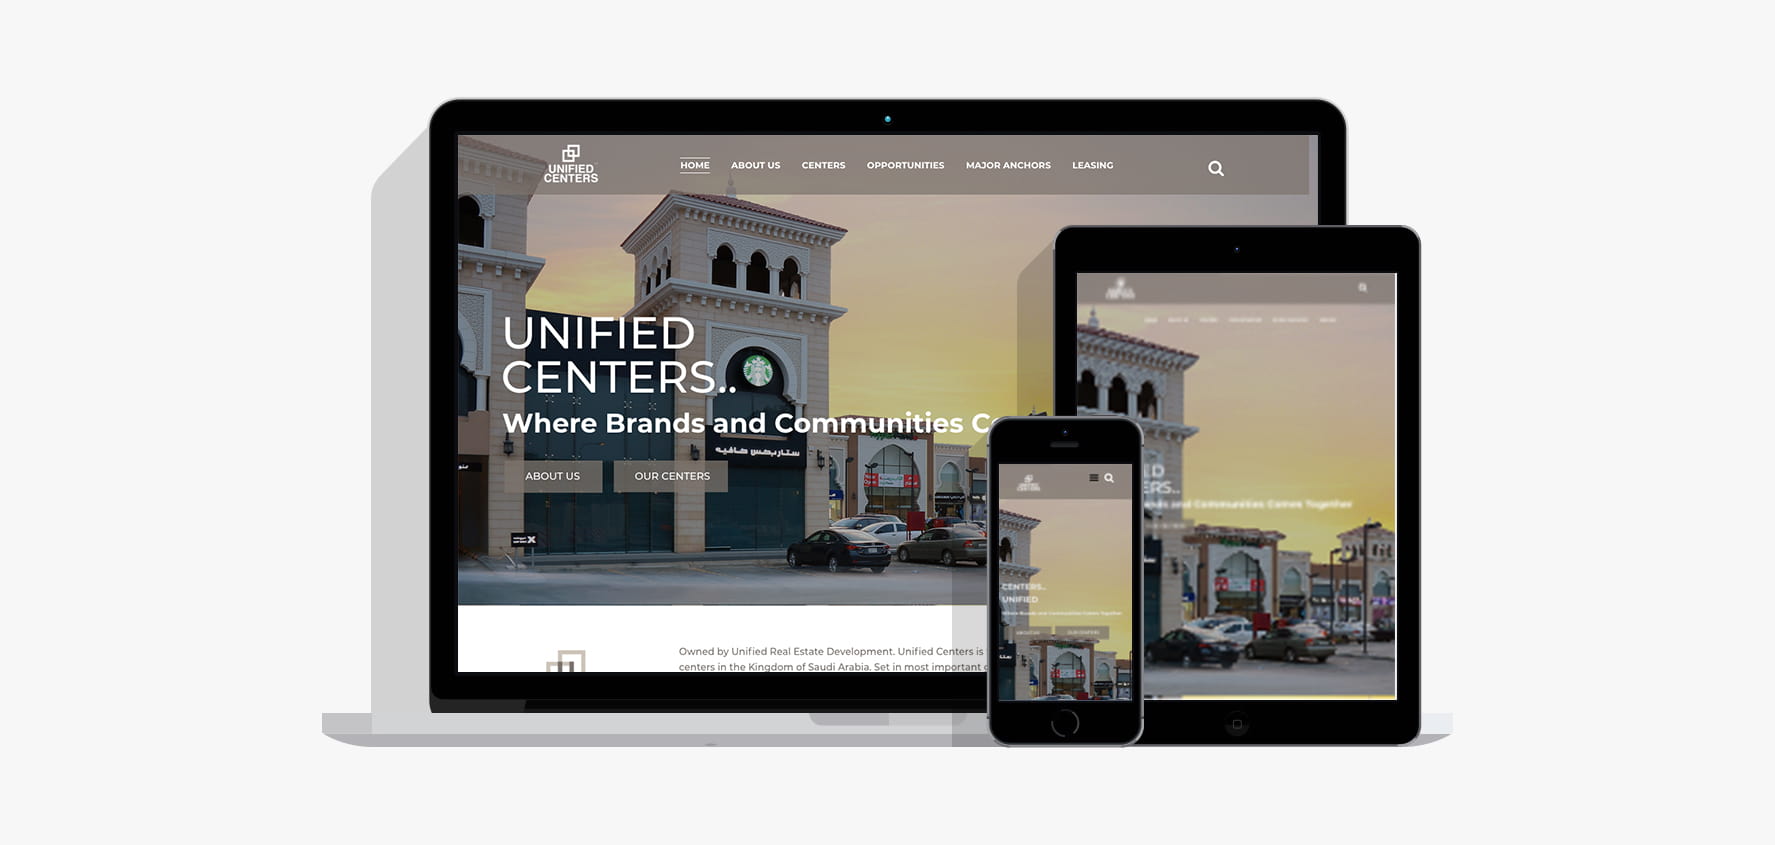 Unified Centers Website